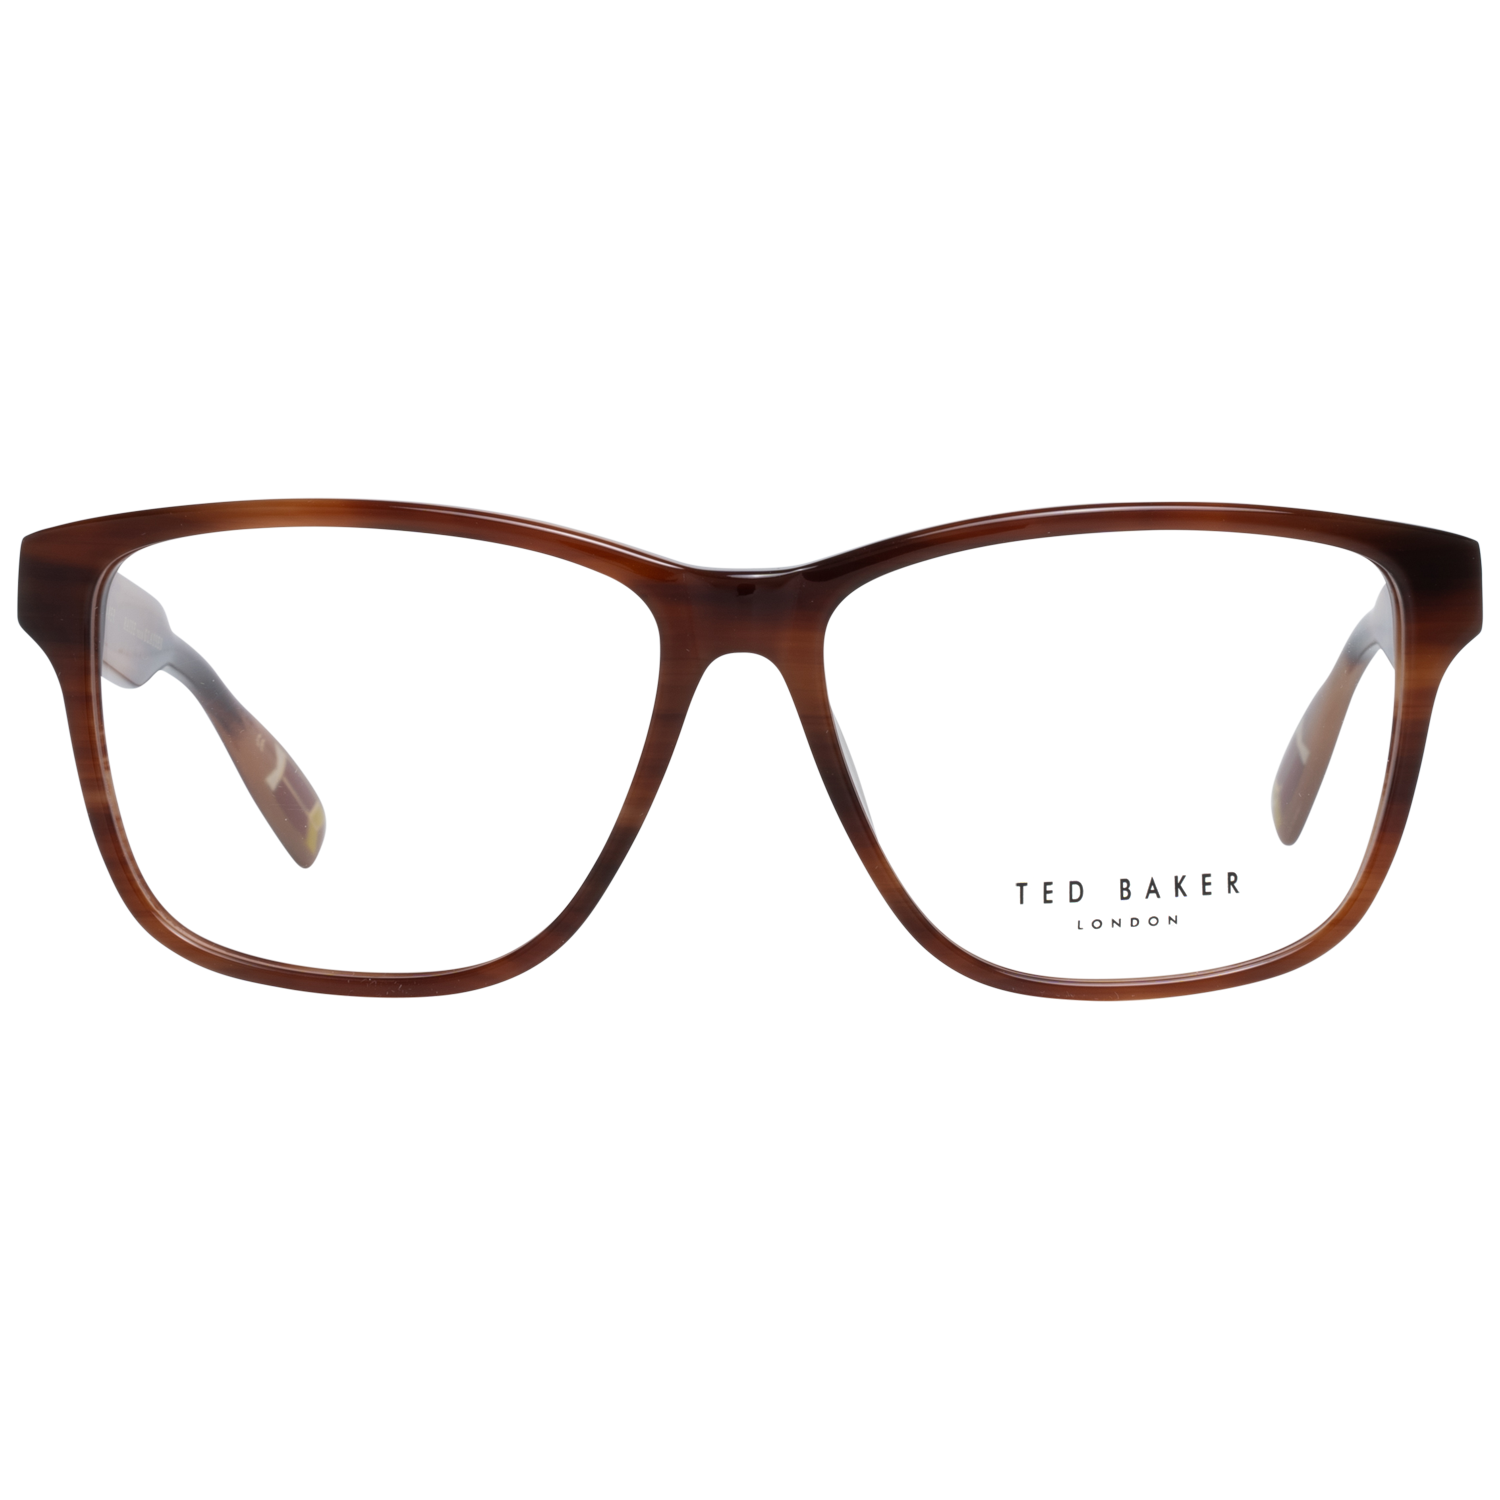 GenderMenMain colorBrownFrame colorBrownFrame materialPlasticSize56-14-145Lenses width56mmLenses heigth43mmBridge length14mmFrame width140mmTemple length145mmShipment includesCase, Cleaning clothStyleFull-RimSpring hingeYes